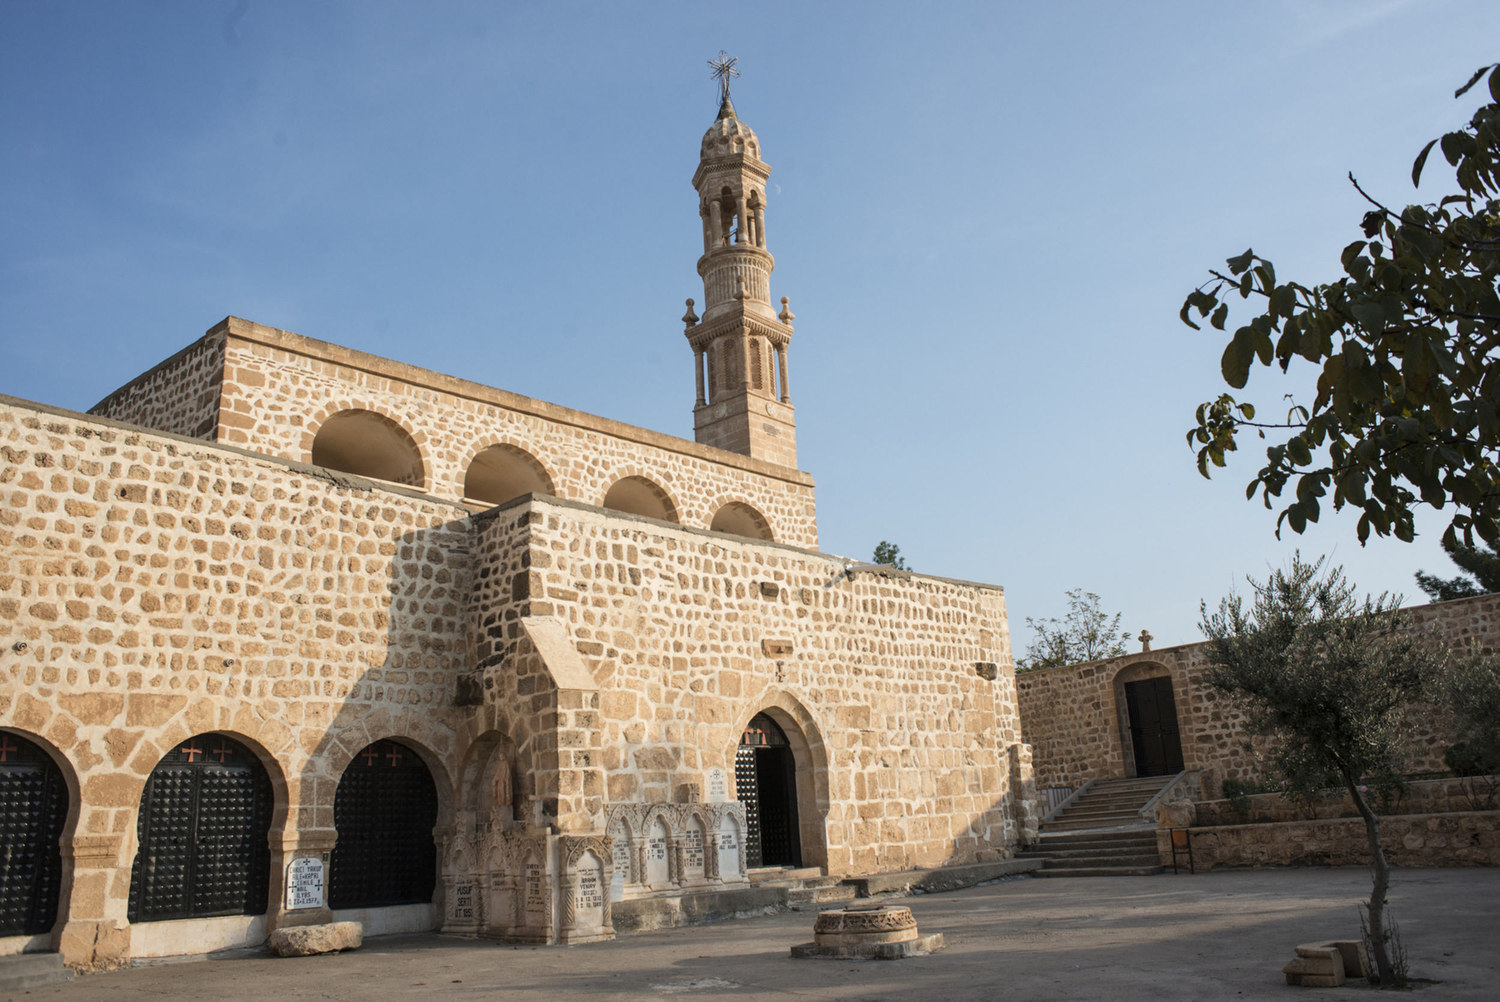  The exterior of the chapel of Mor Abraham, a monastary located on the outskirts of Midyat, Turkey.

Mor Abraham's land has been used as a refugee camp to house Syrian refugees and currently has two Christian men. 